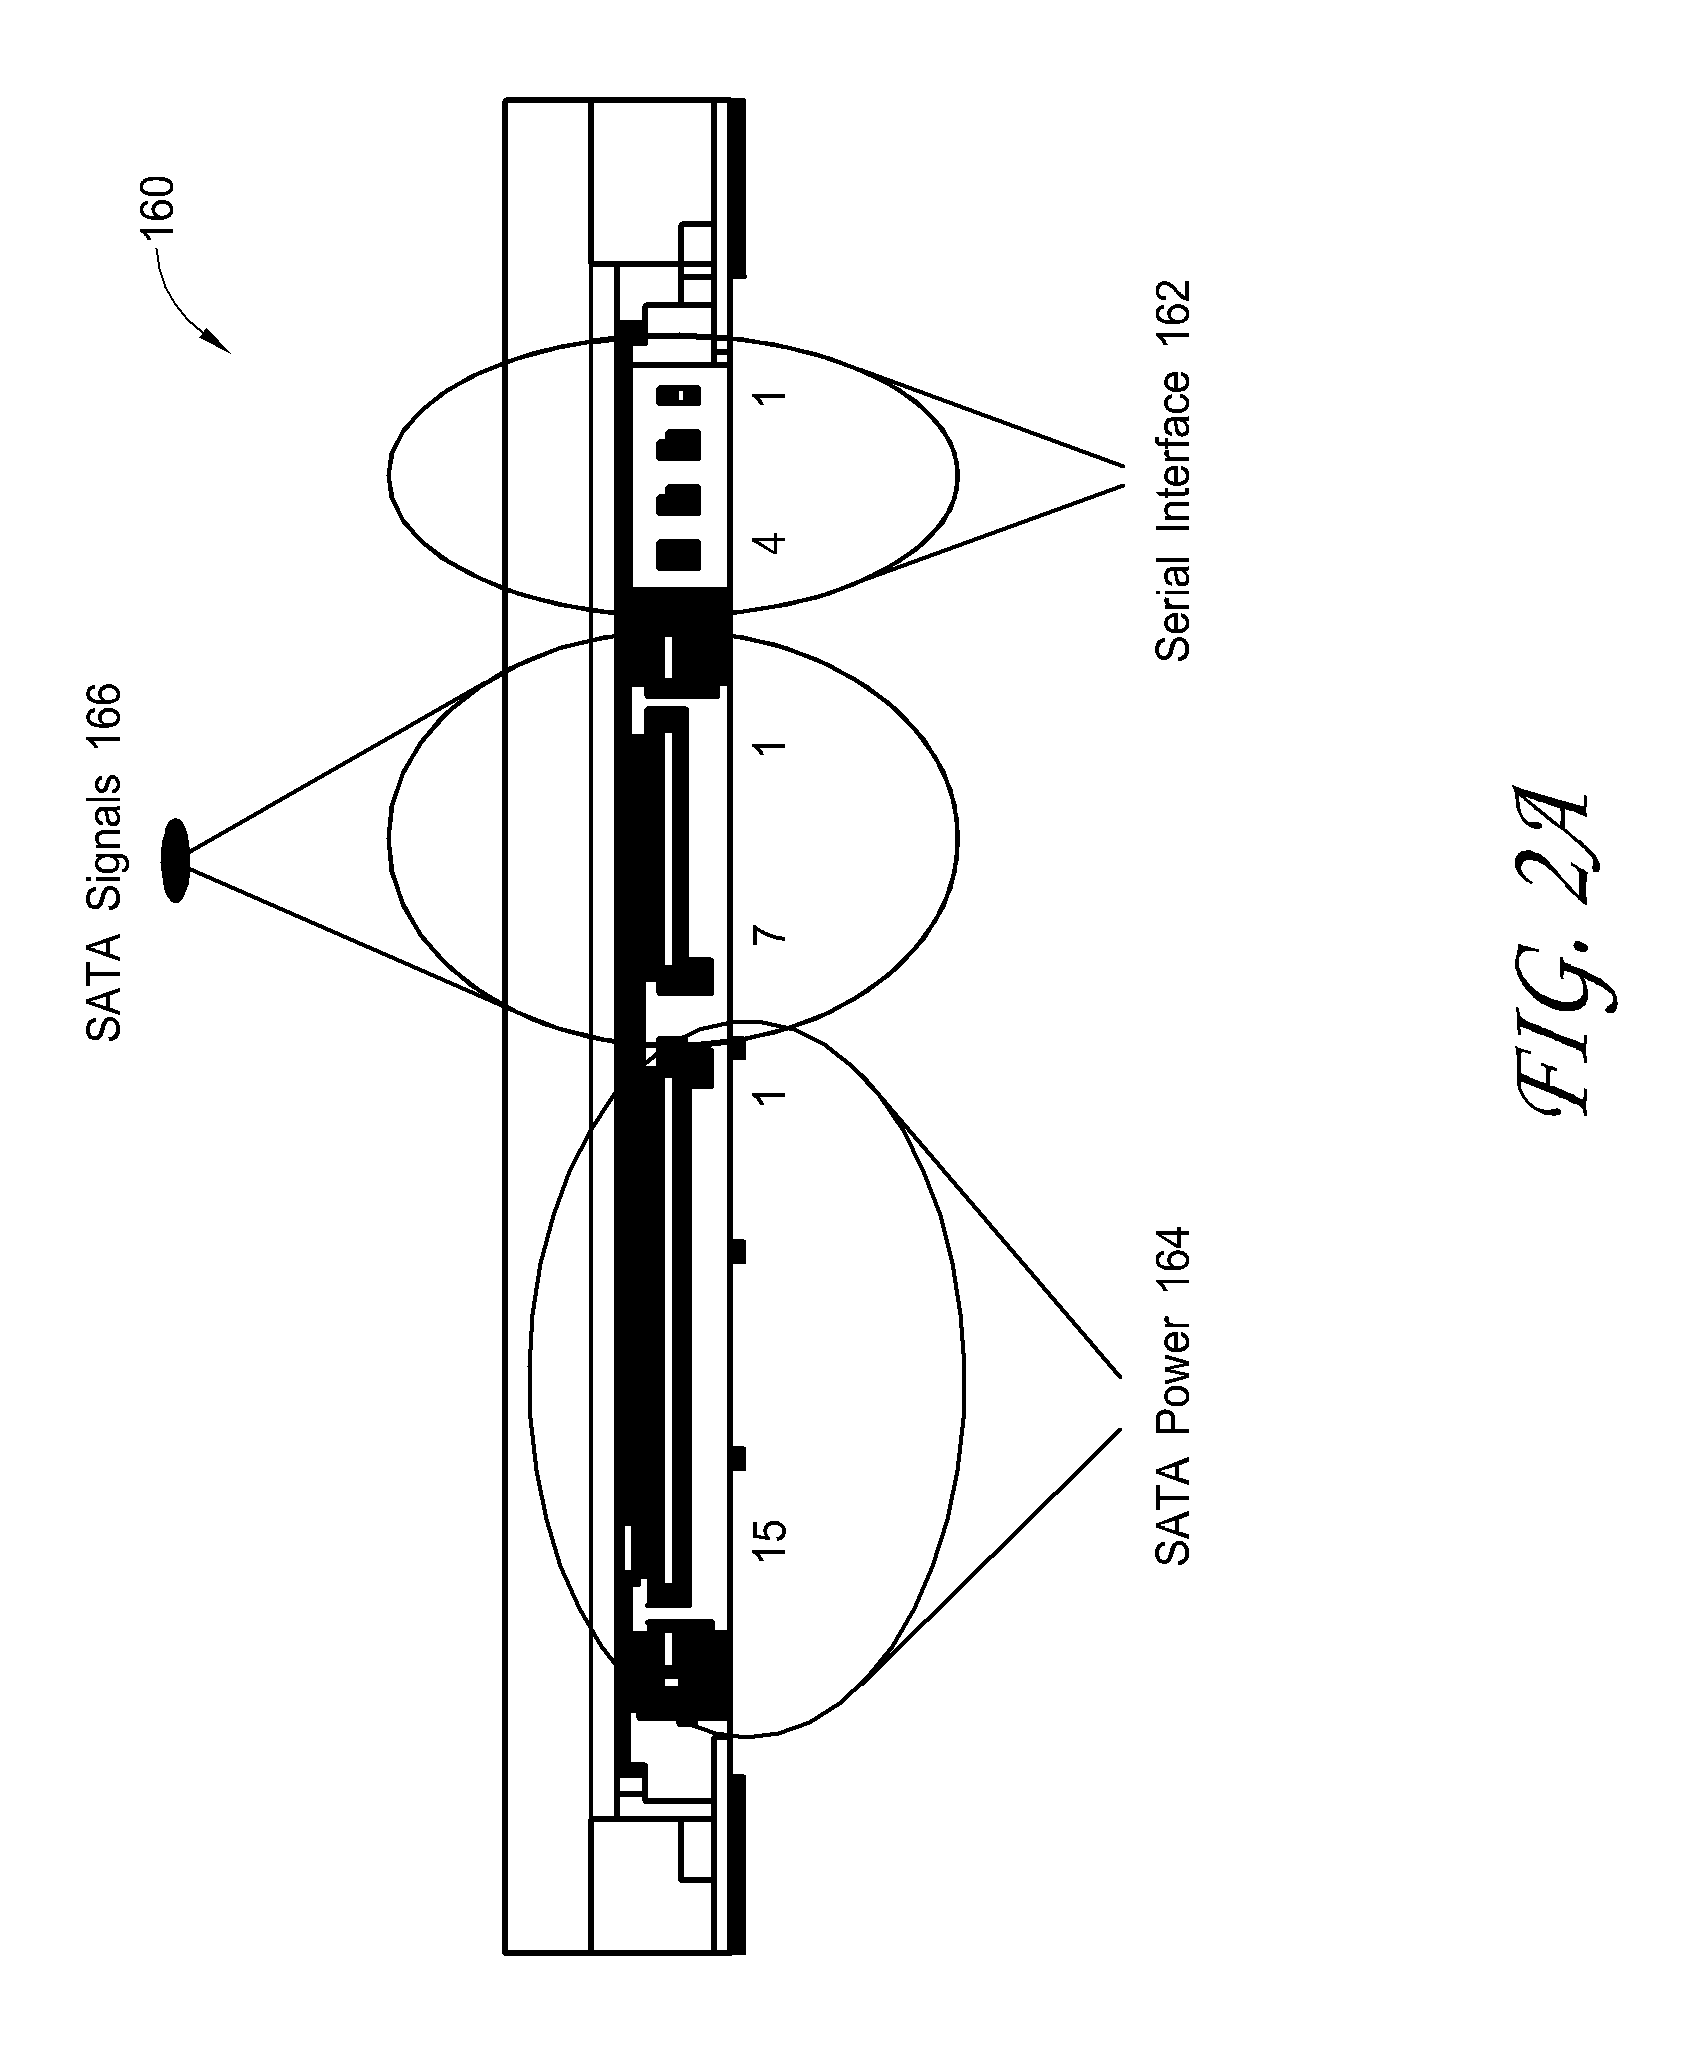 Interface for enabling a host computer to retrieve device monitor data from a solid state storage subsystem